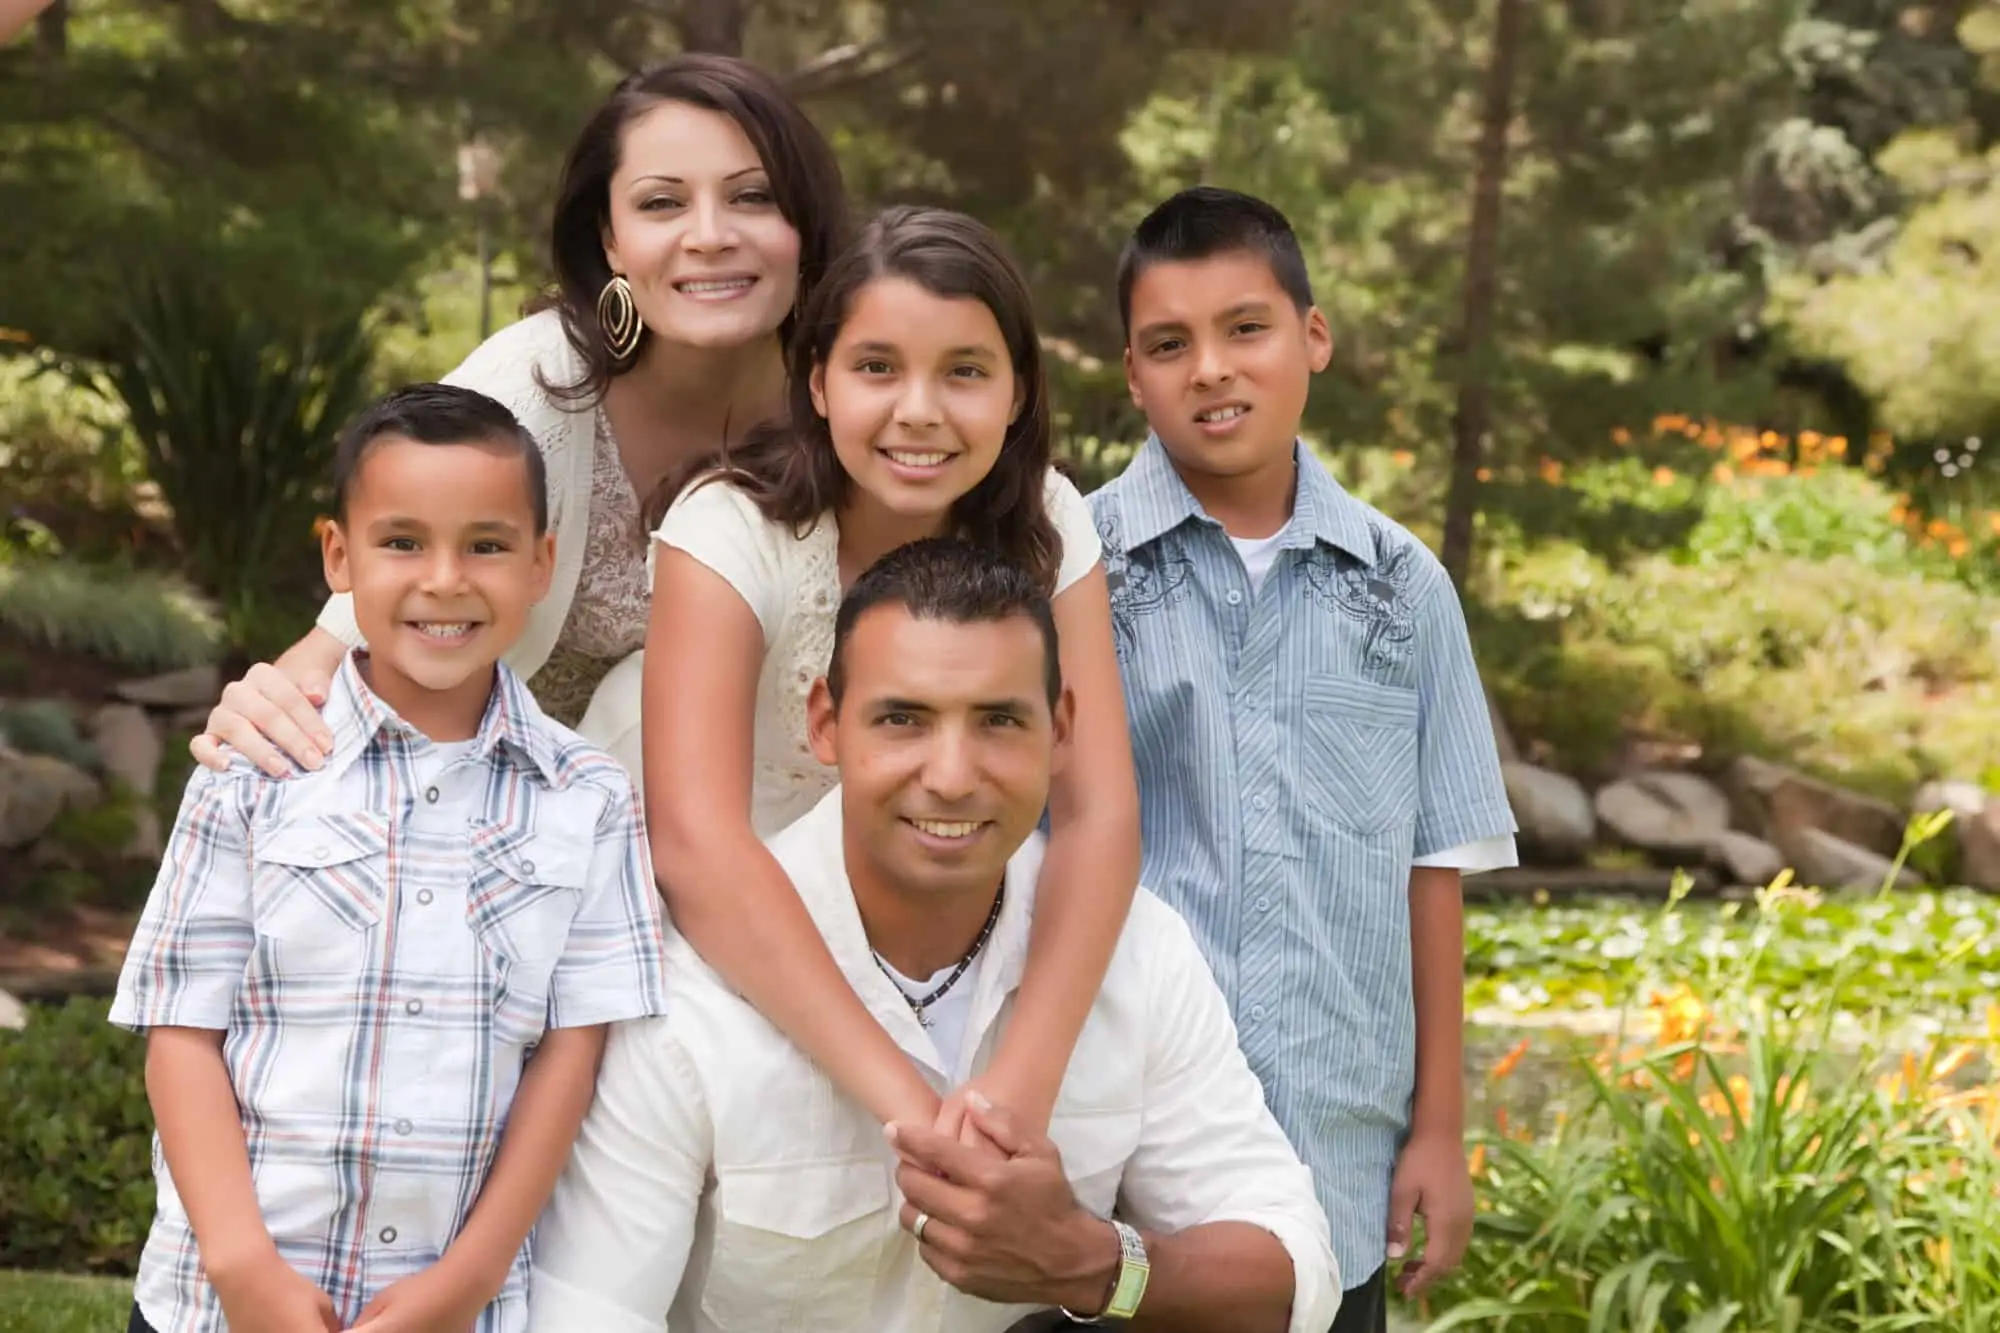 Mexican family taking a family photo in a park to celebrate the family business